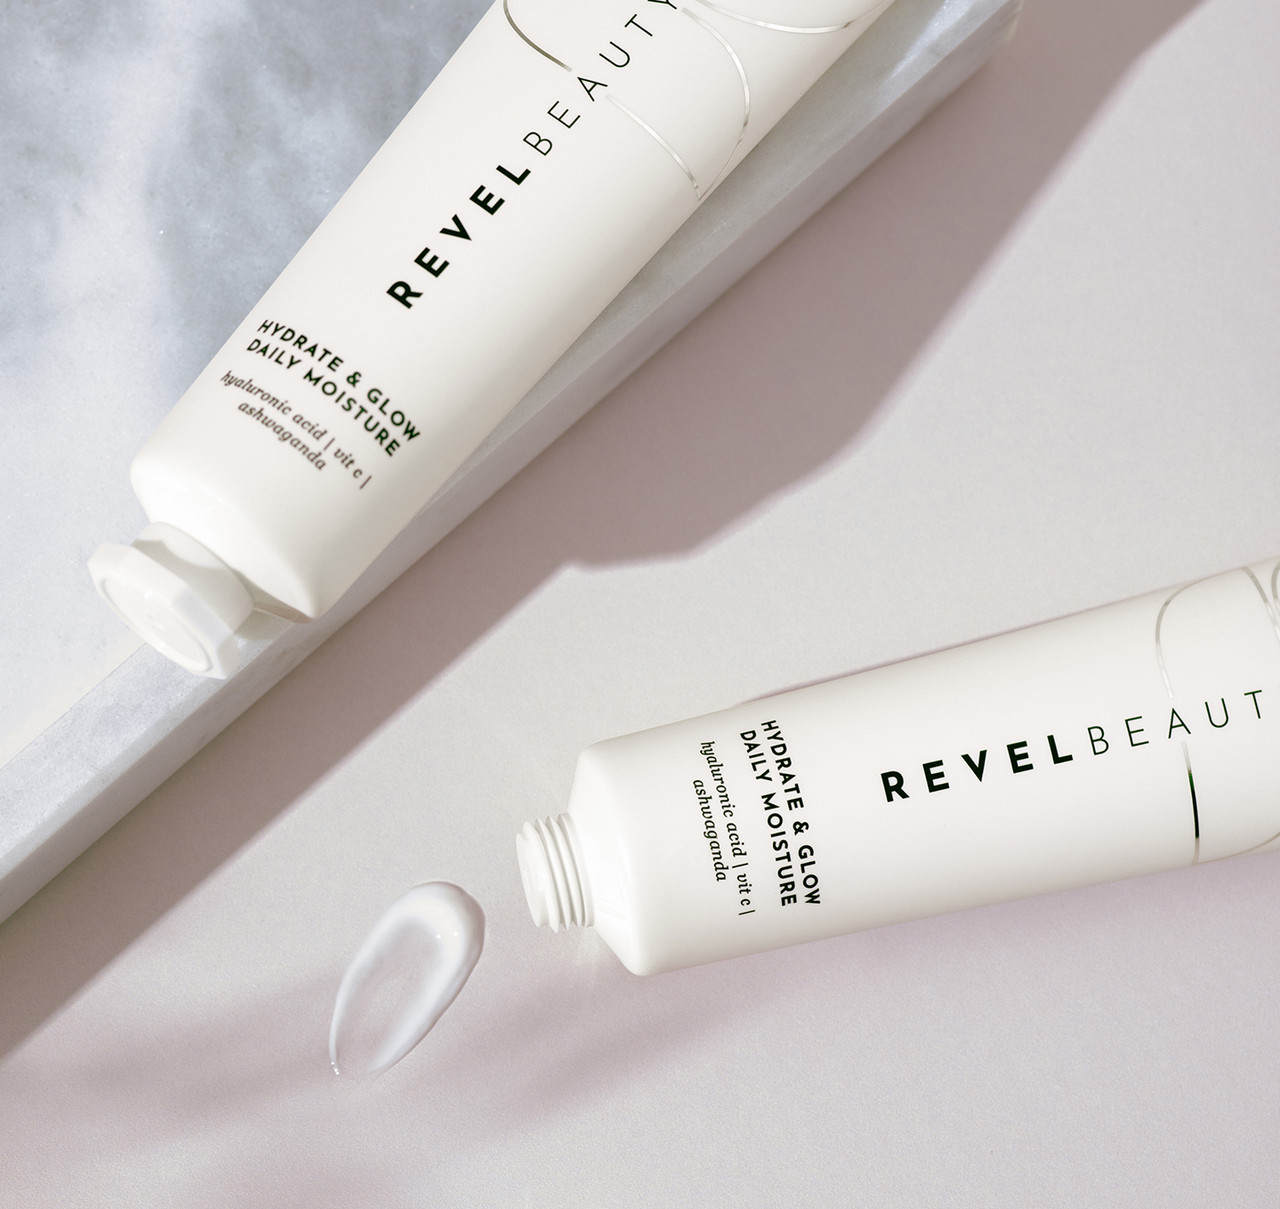 Revel Beauty Instantly firms and tightens your look